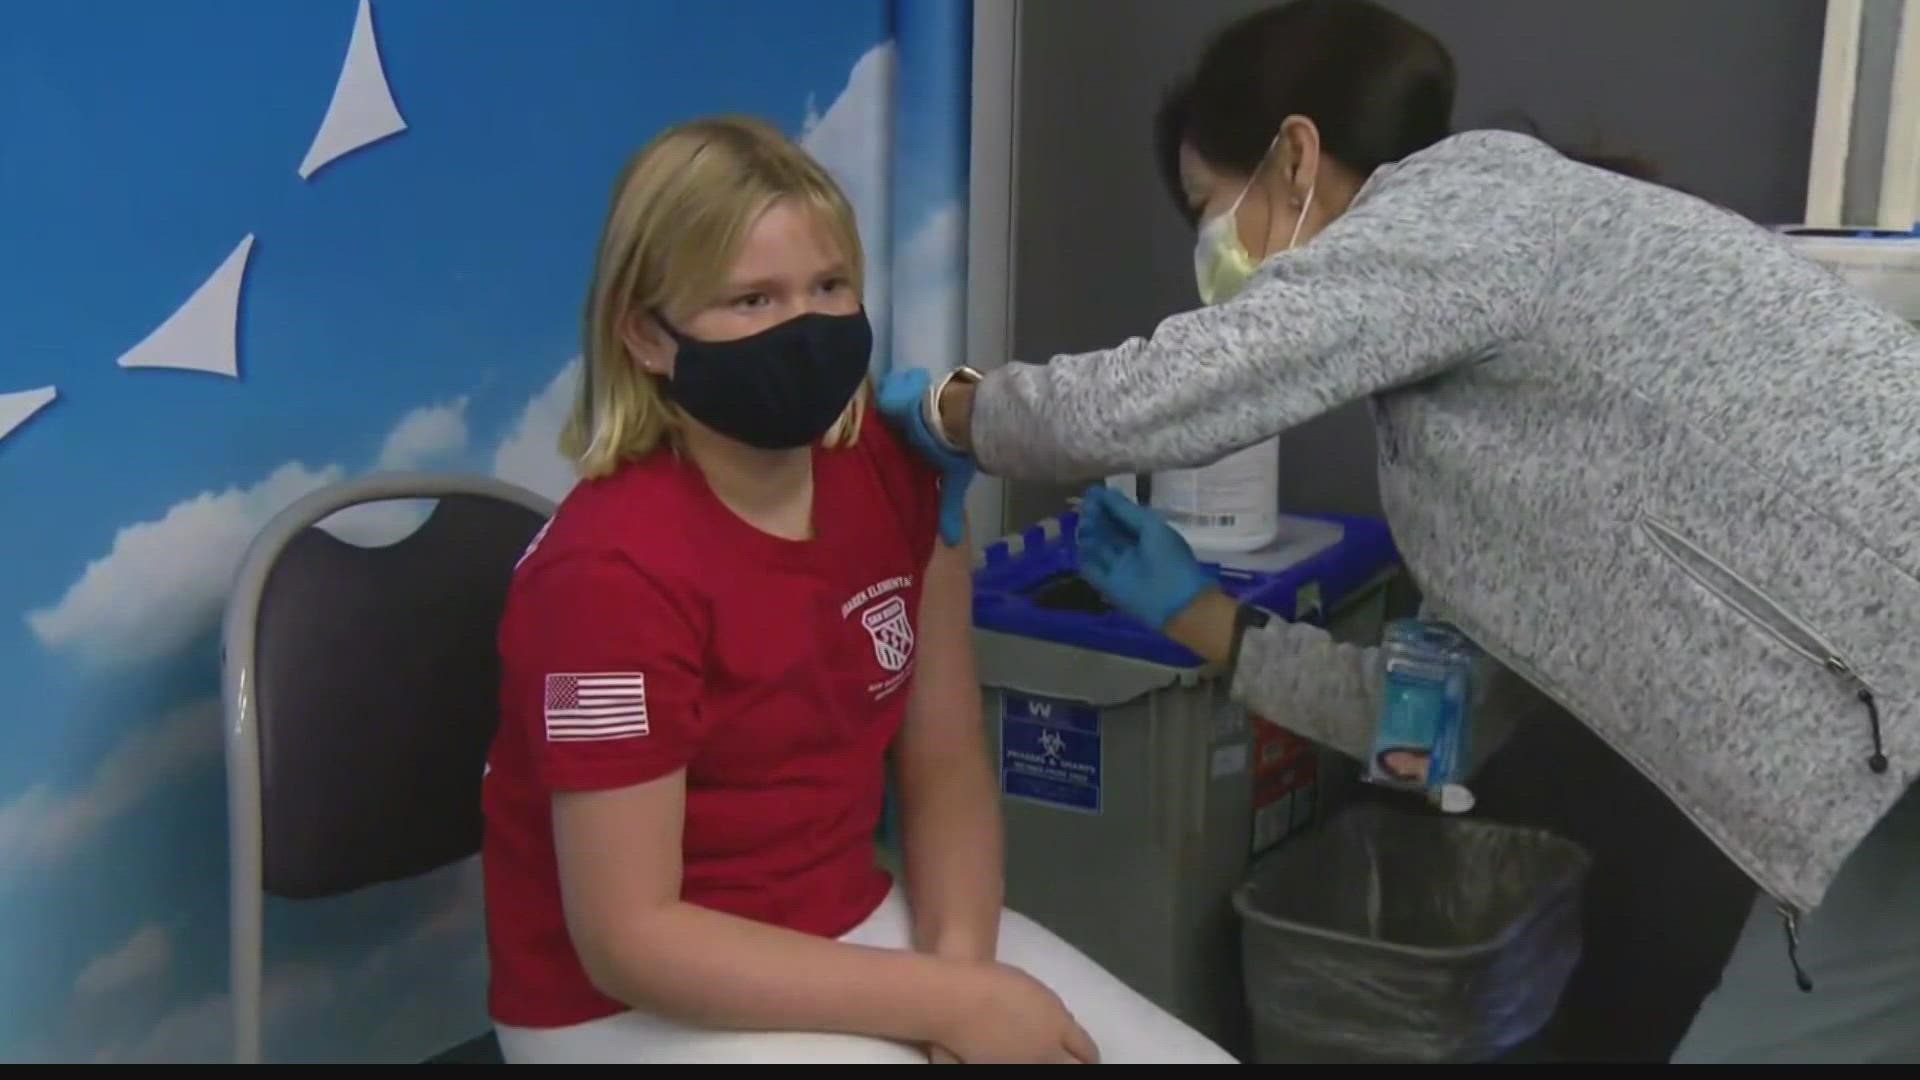 Parents and grandparents of children ages 5 to 11 are asking questions about the new COVID vaccine for younger children. 13 Investigates found some answers.